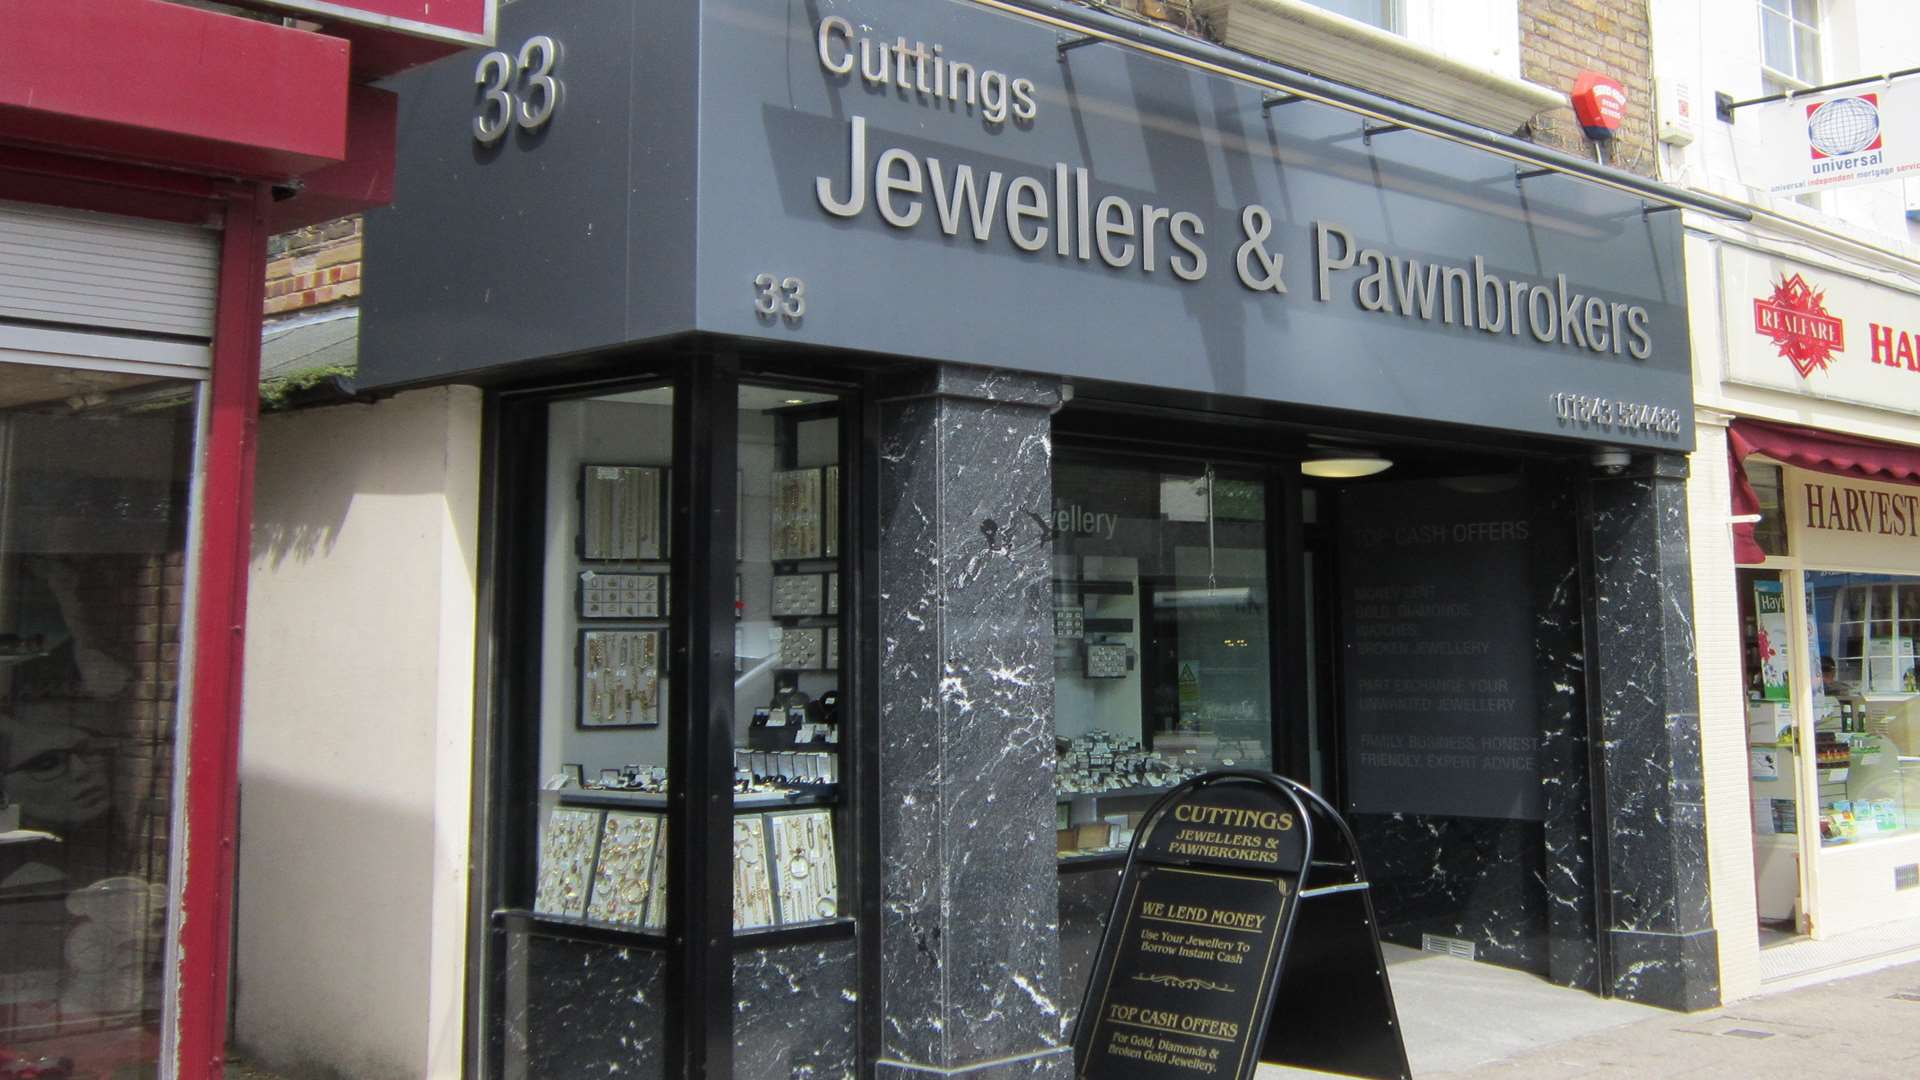 The Cuttings Jewellers and Pawnbrokers shop